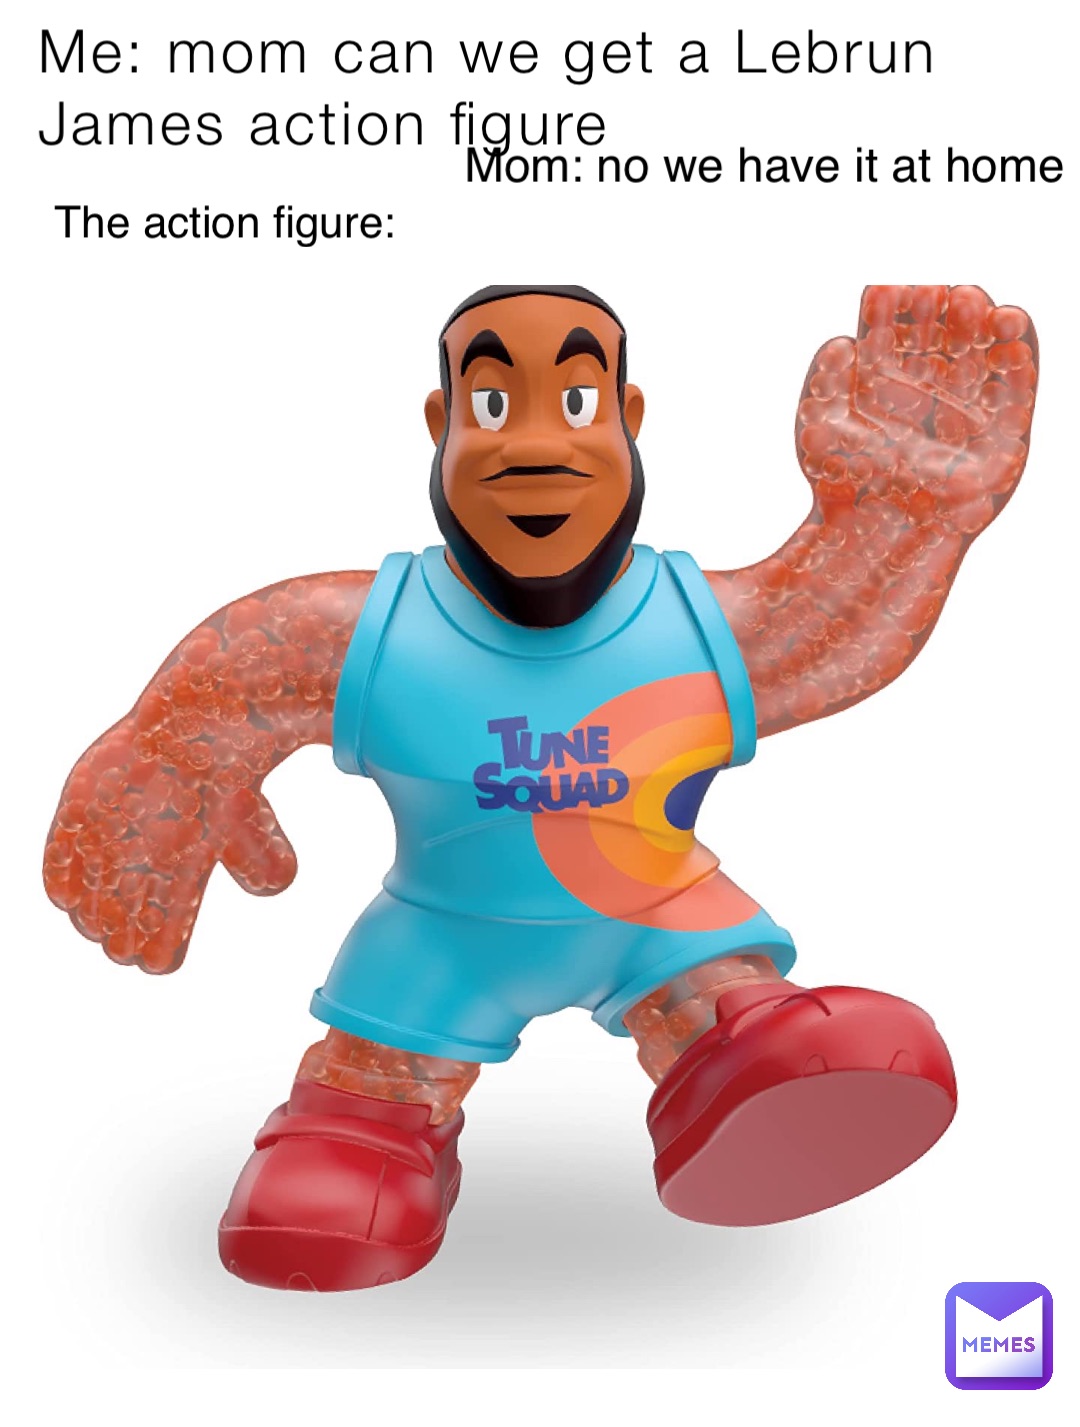 Me: mom can we get a Lebrun James action figure Mom: no we have it at home The action figure: